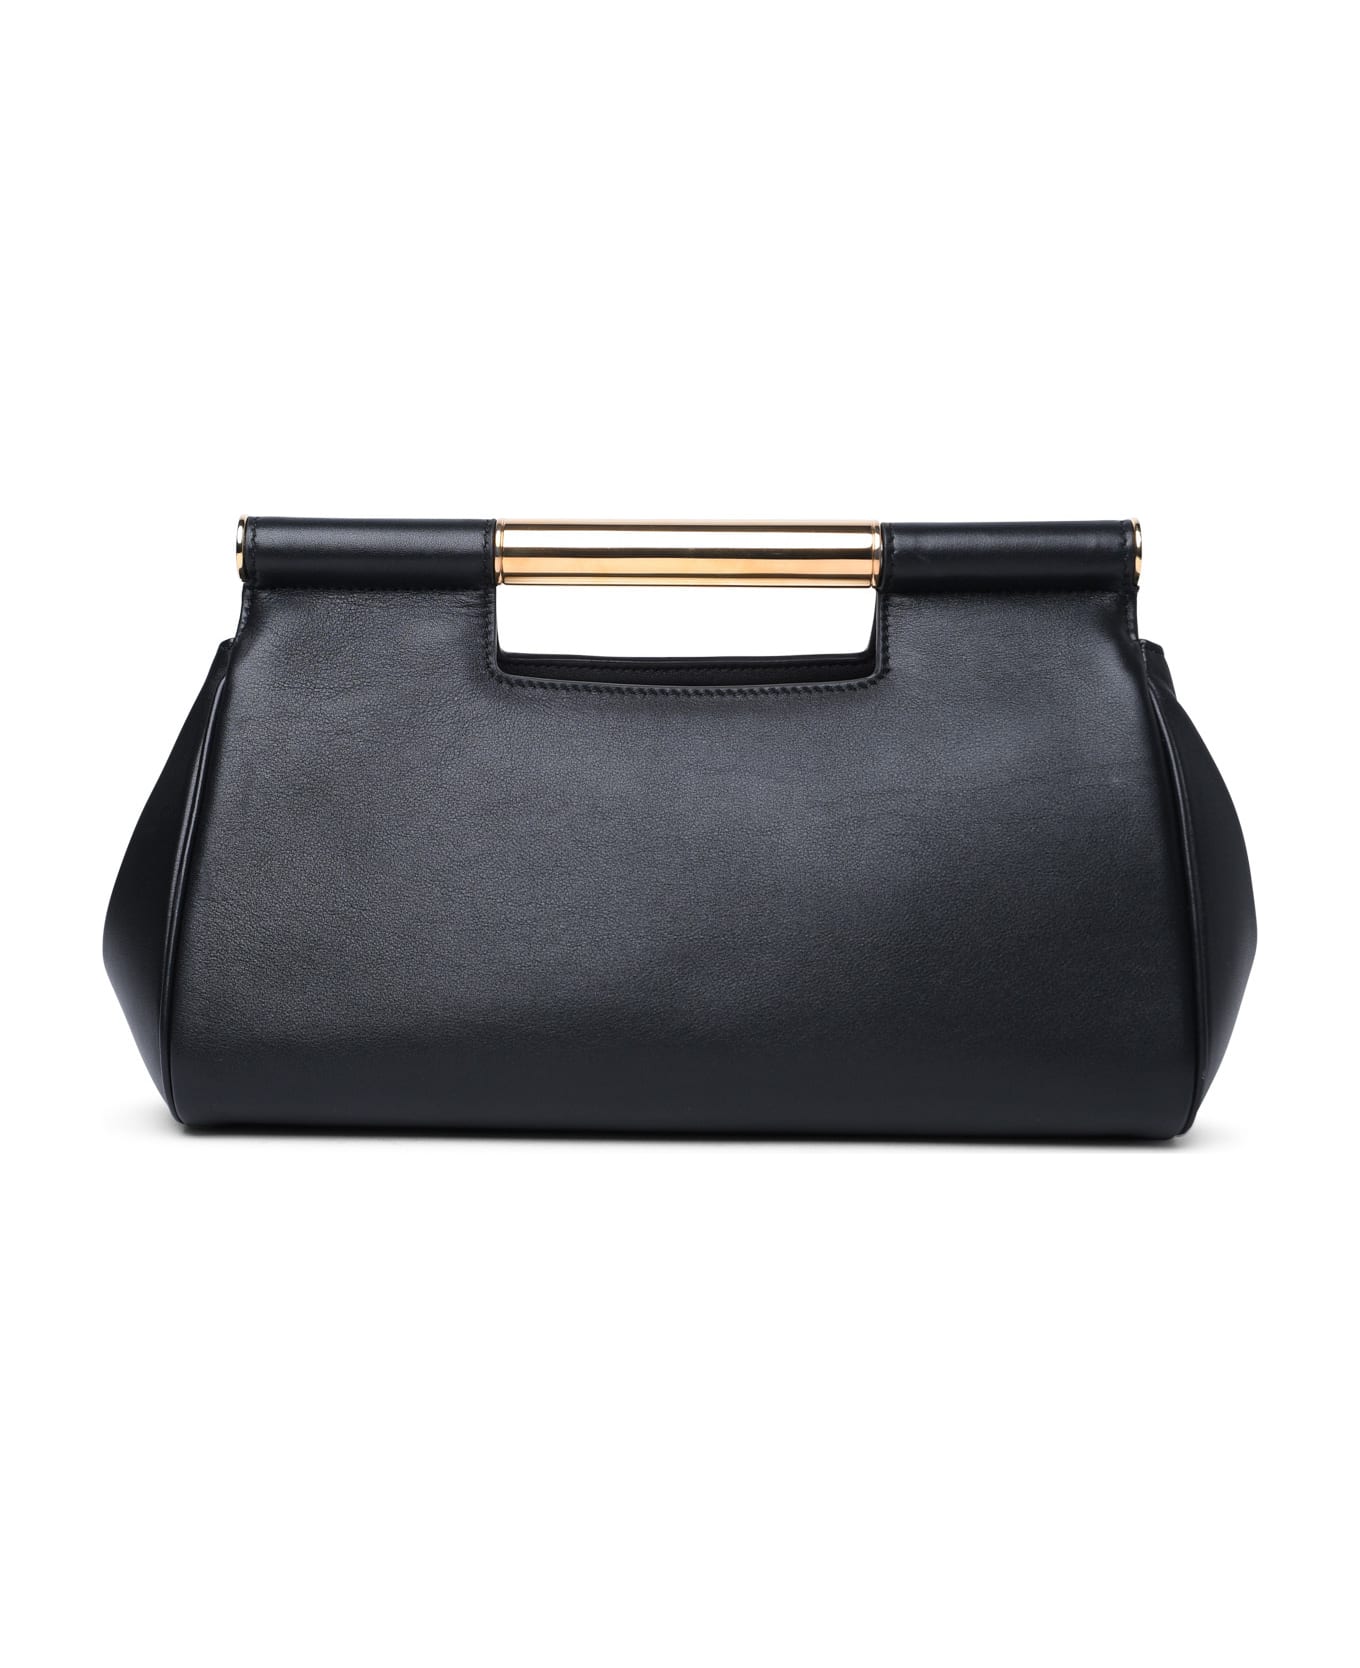 Dolce & Gabbana Sicily Leather Clutch - Black クラッチバッグ